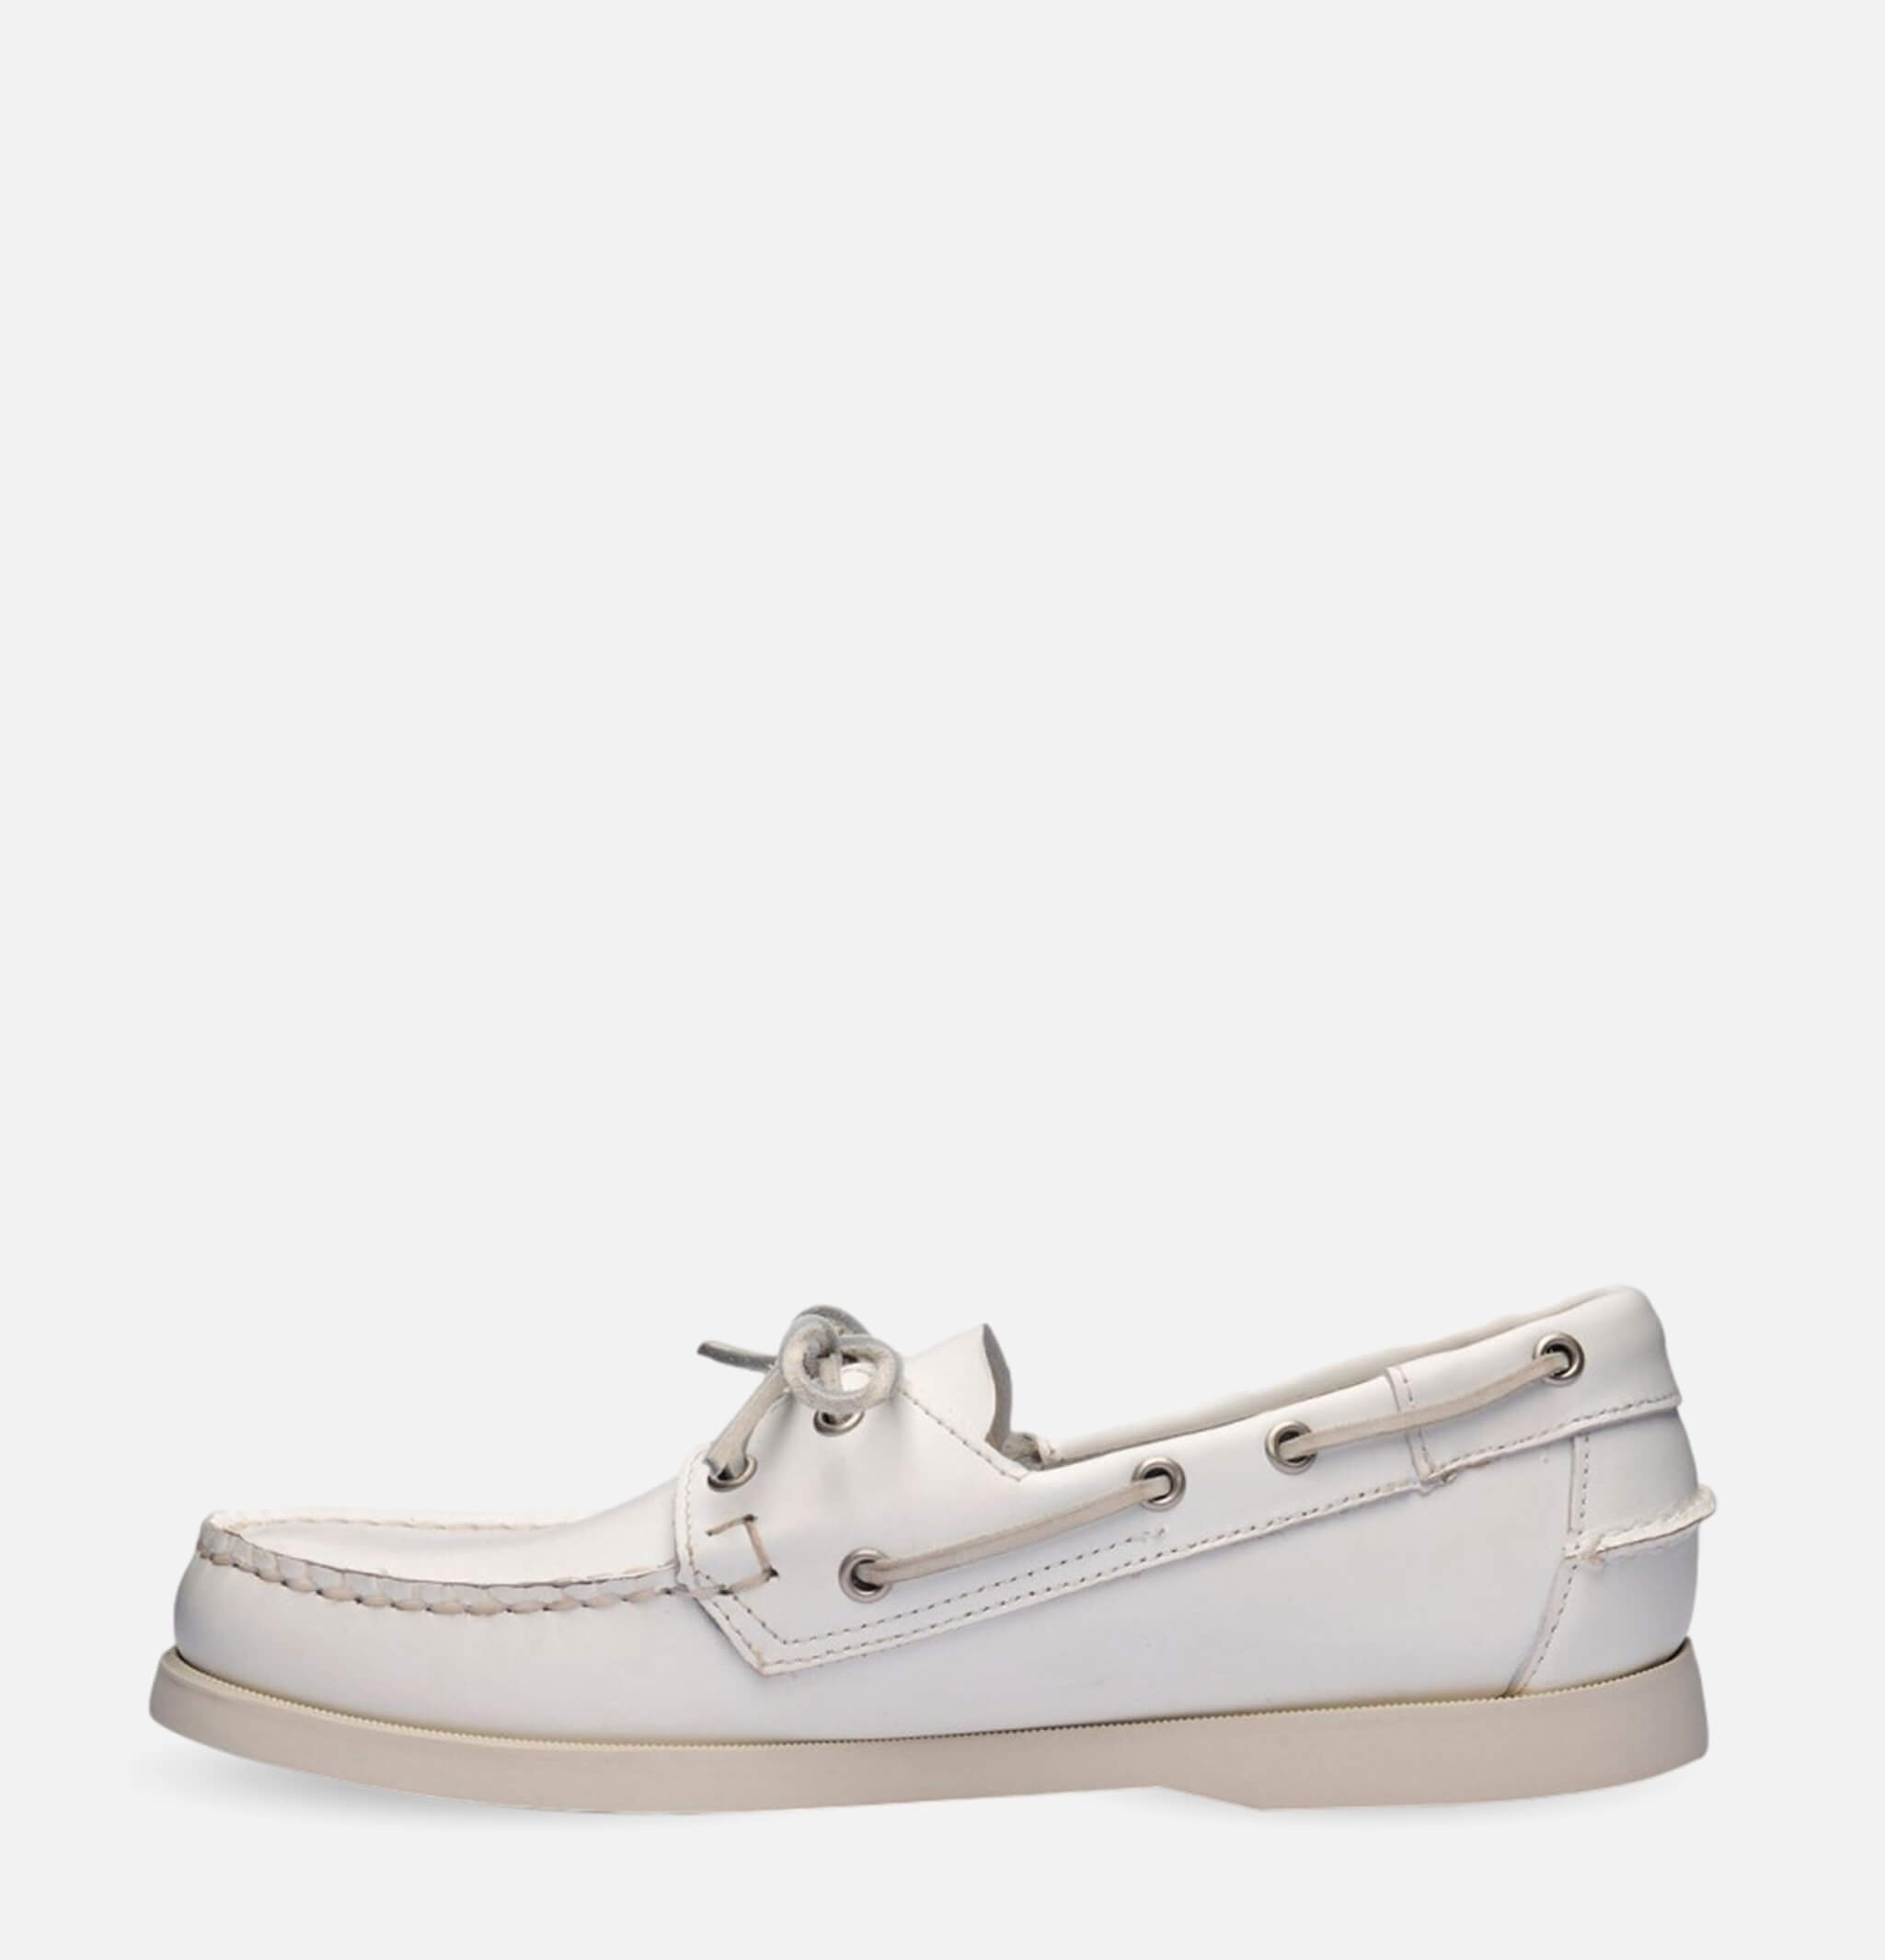 Chaussures Docksides White